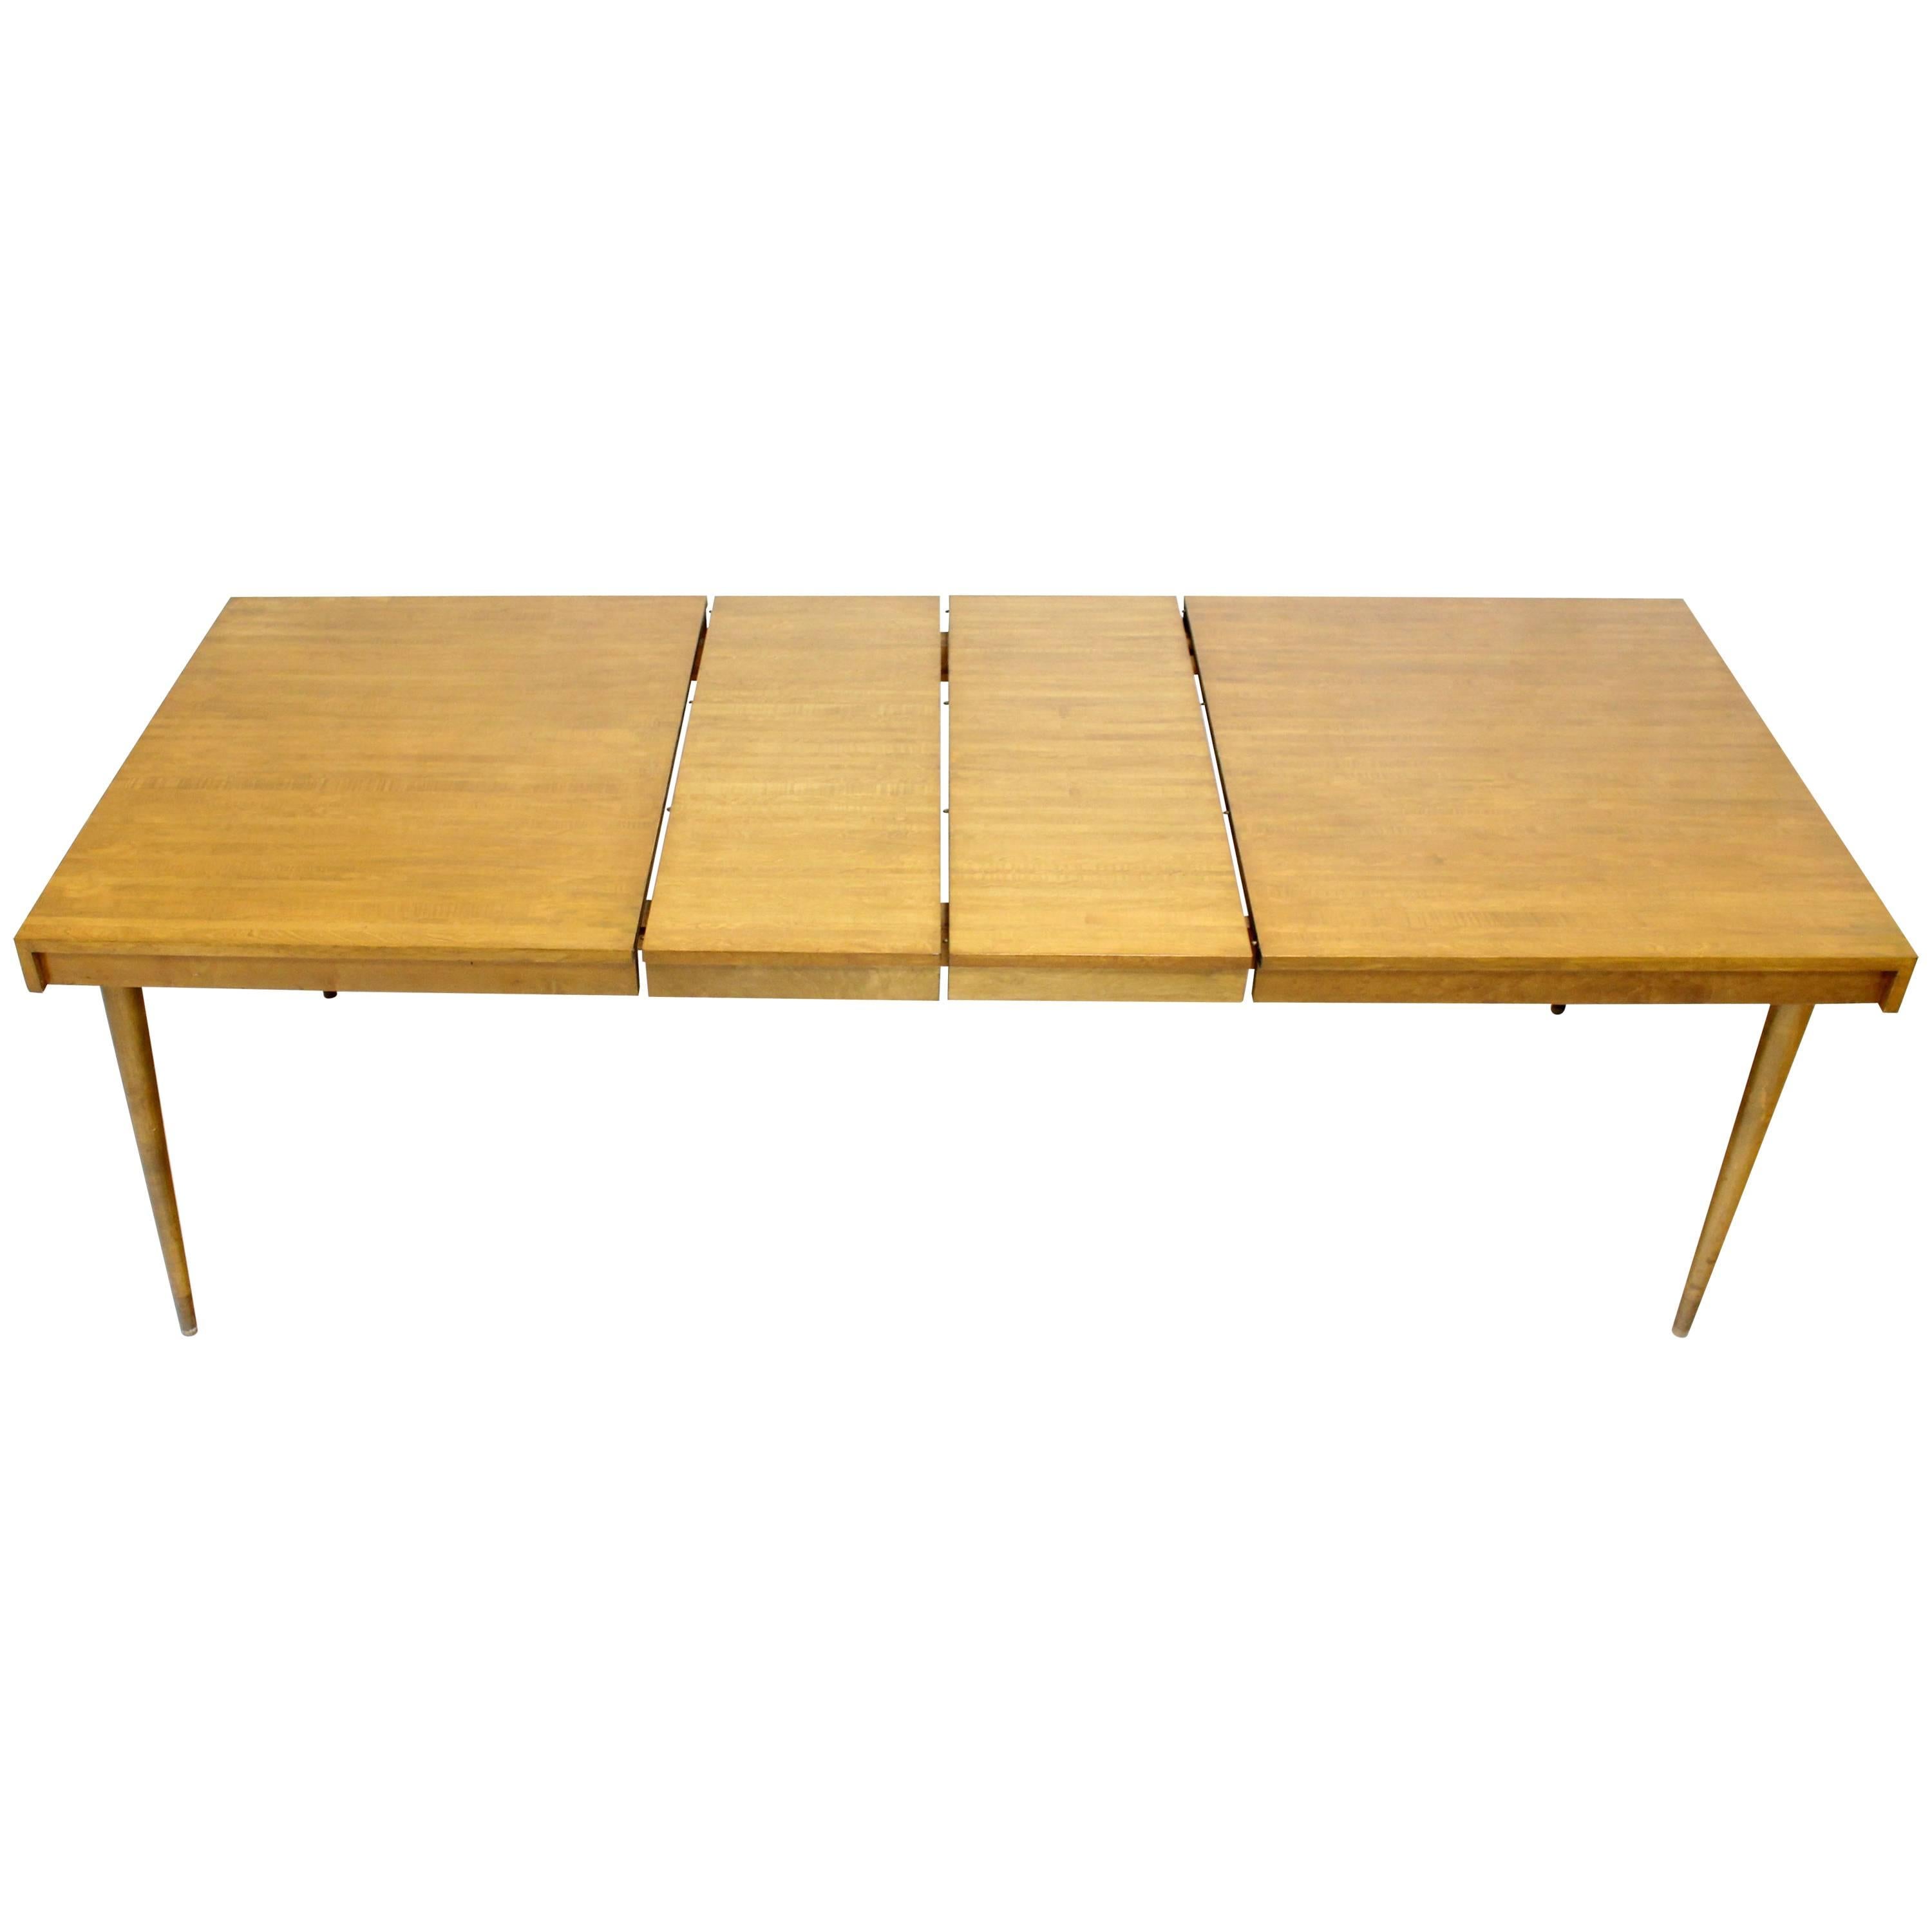 Swedish Blond Birch Dining Table w/ Two Extension Boards Leafs  For Sale